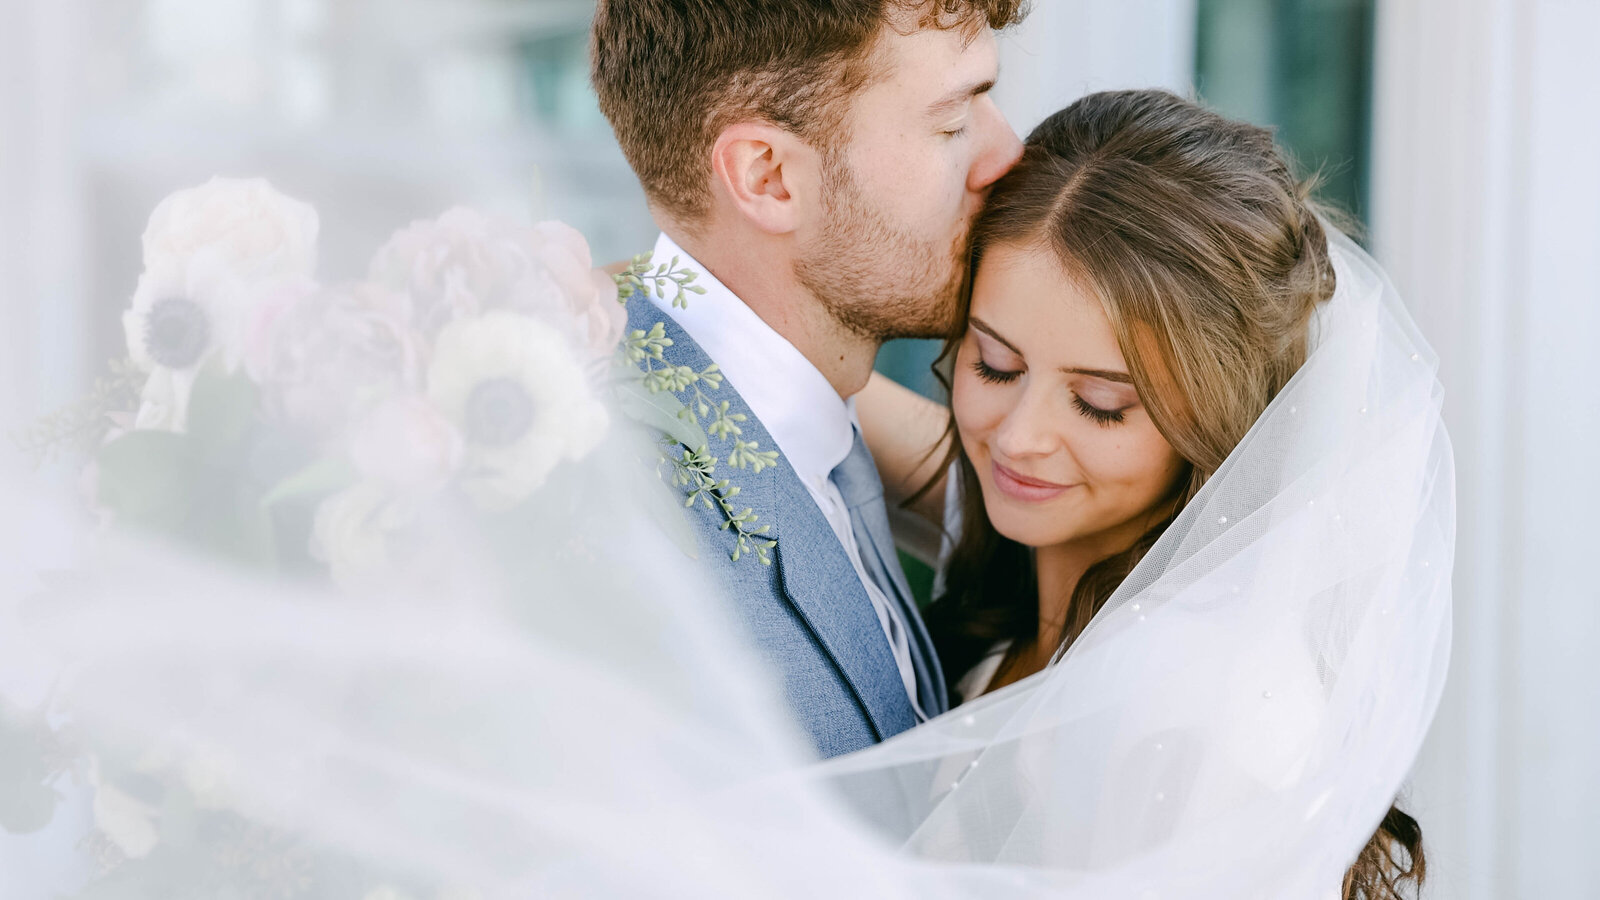 Bright and Airy Bride and Groom High End Luxury Wedding Videography by Cali Warner Media in Utah Salt Lake City